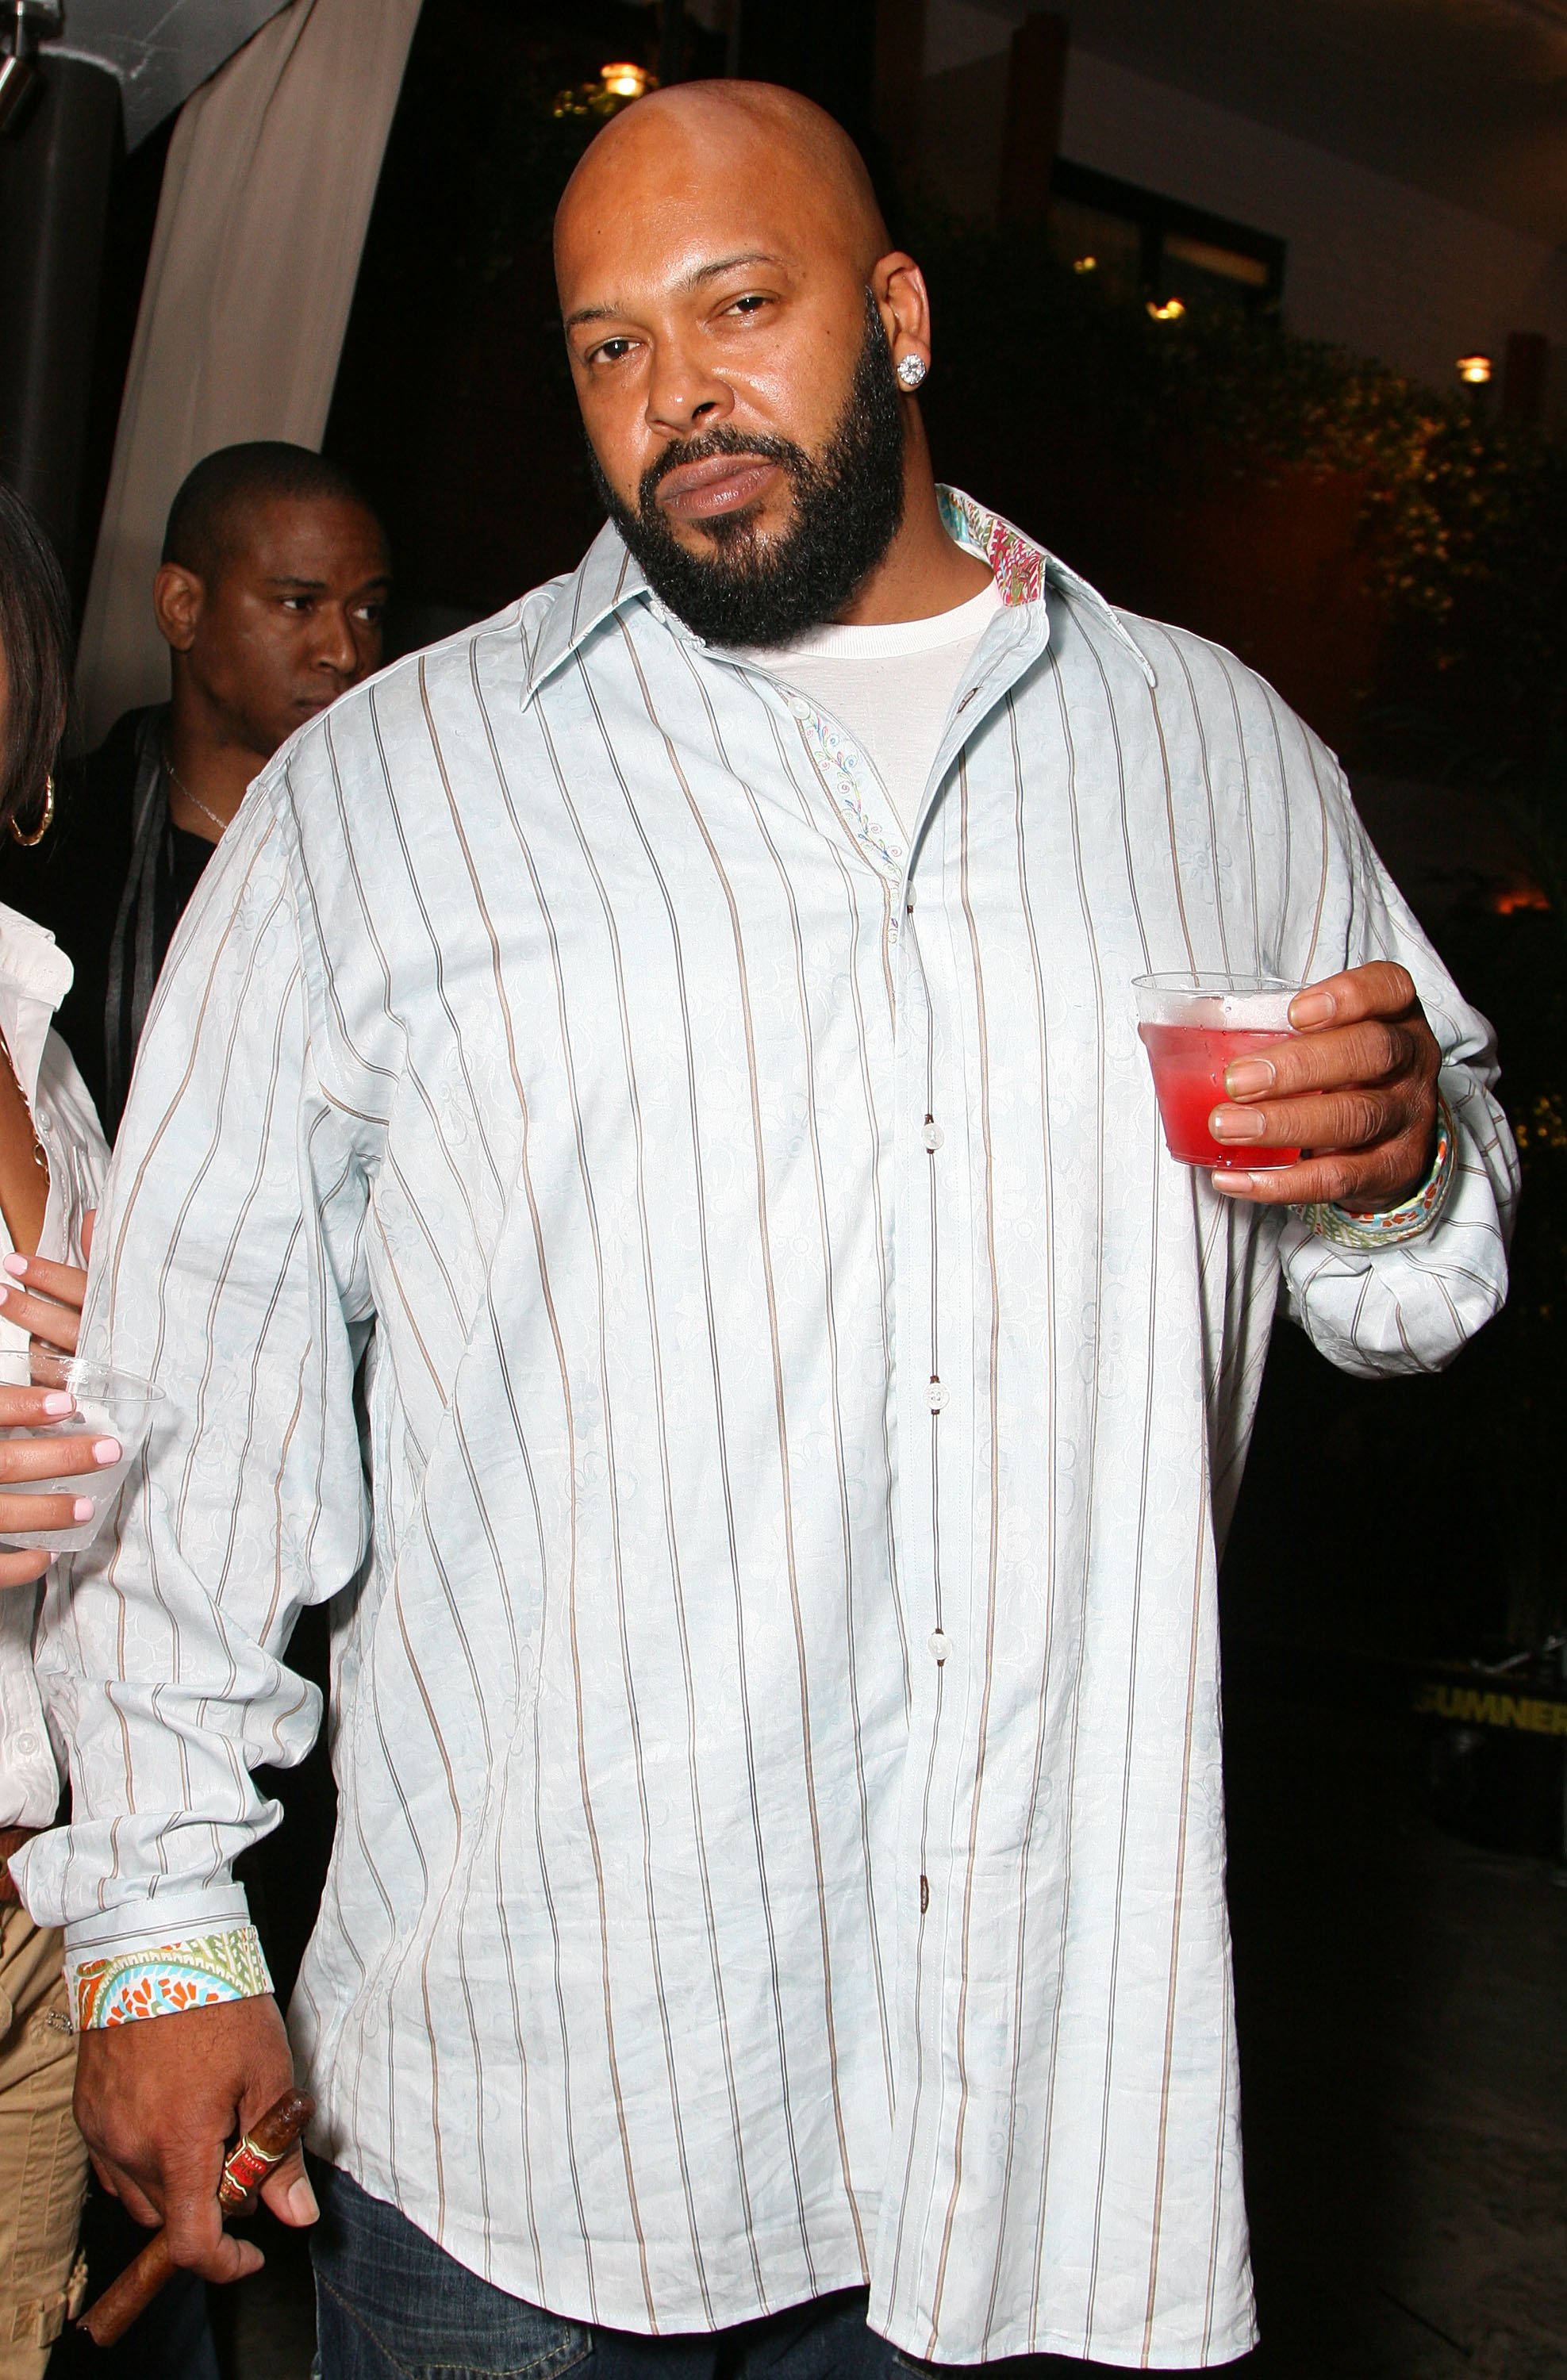 Suge Knight at a BET Awards after party in 2007. | Photo: Getty Images